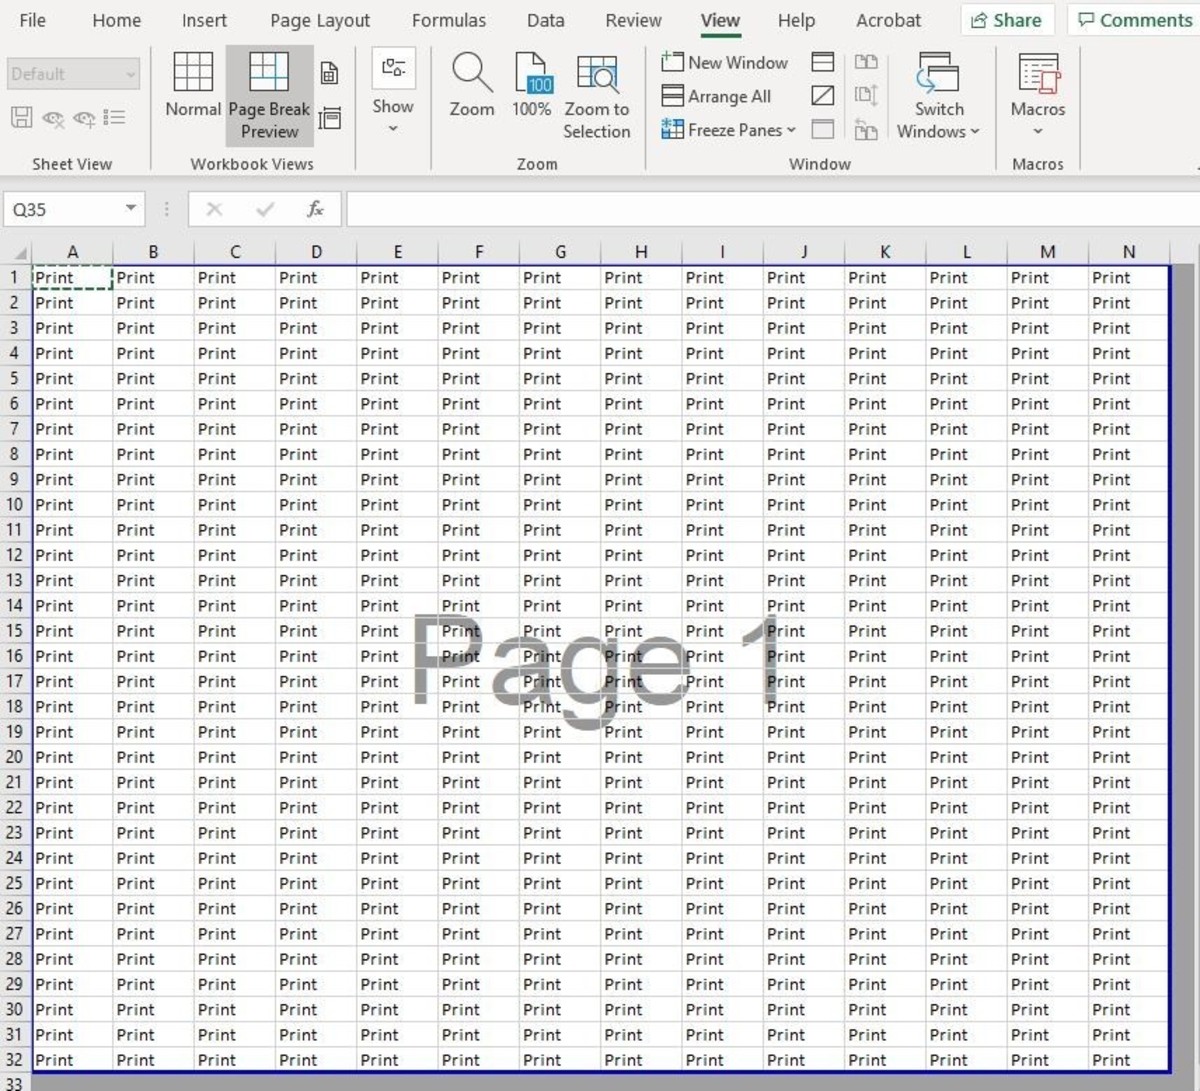 Excel isn't printing your entire sheet? Read on to find out how you can fix it.